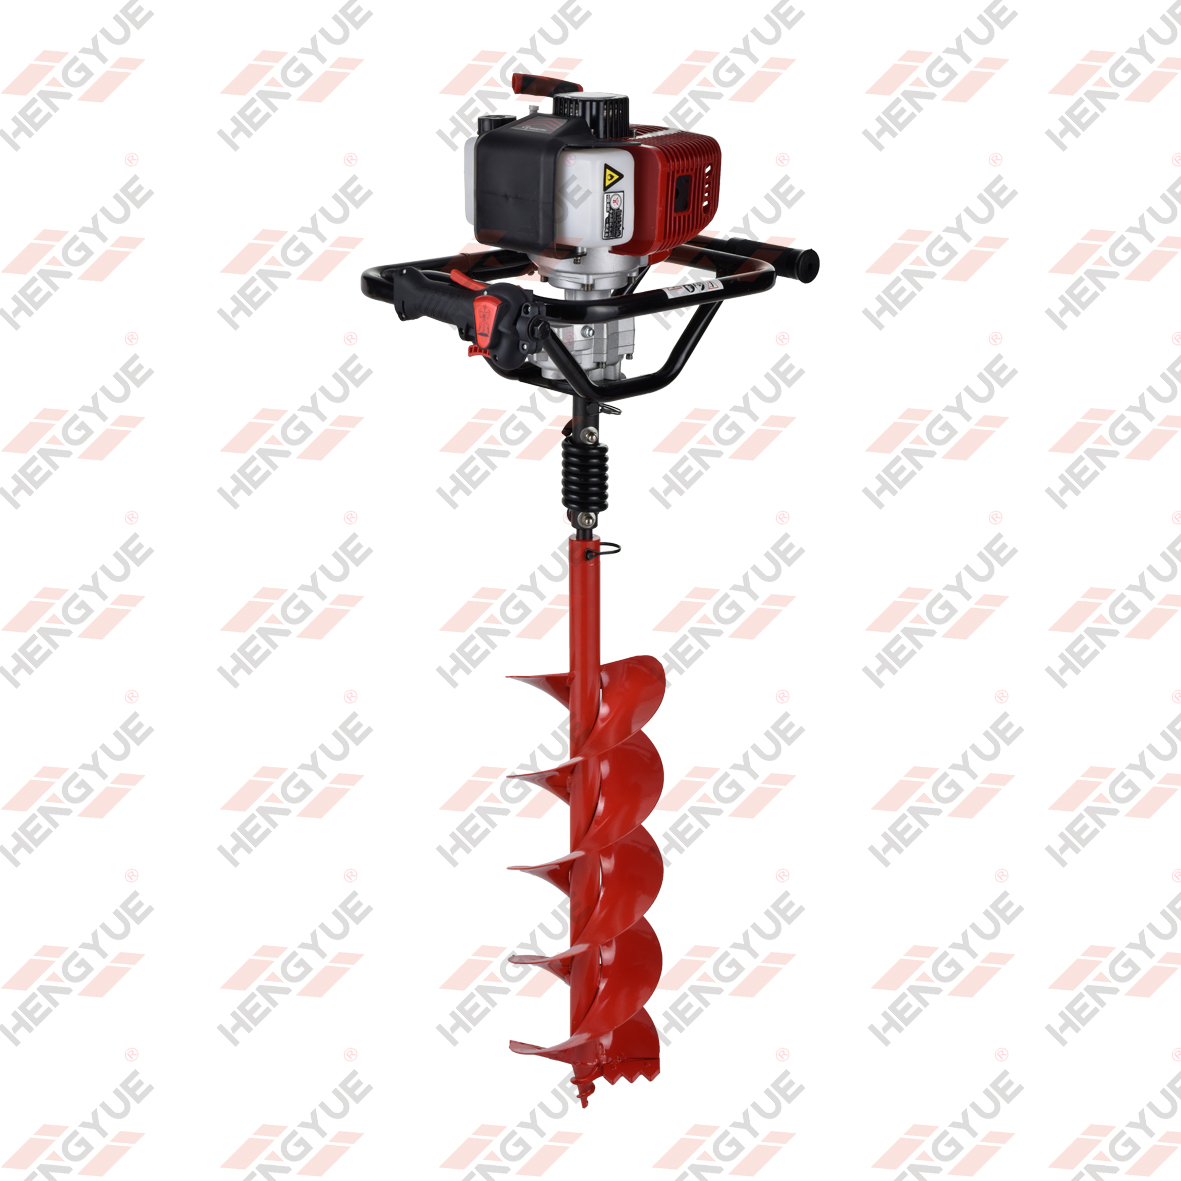 58cc 2 Stroke Engine Power Earth Auger 